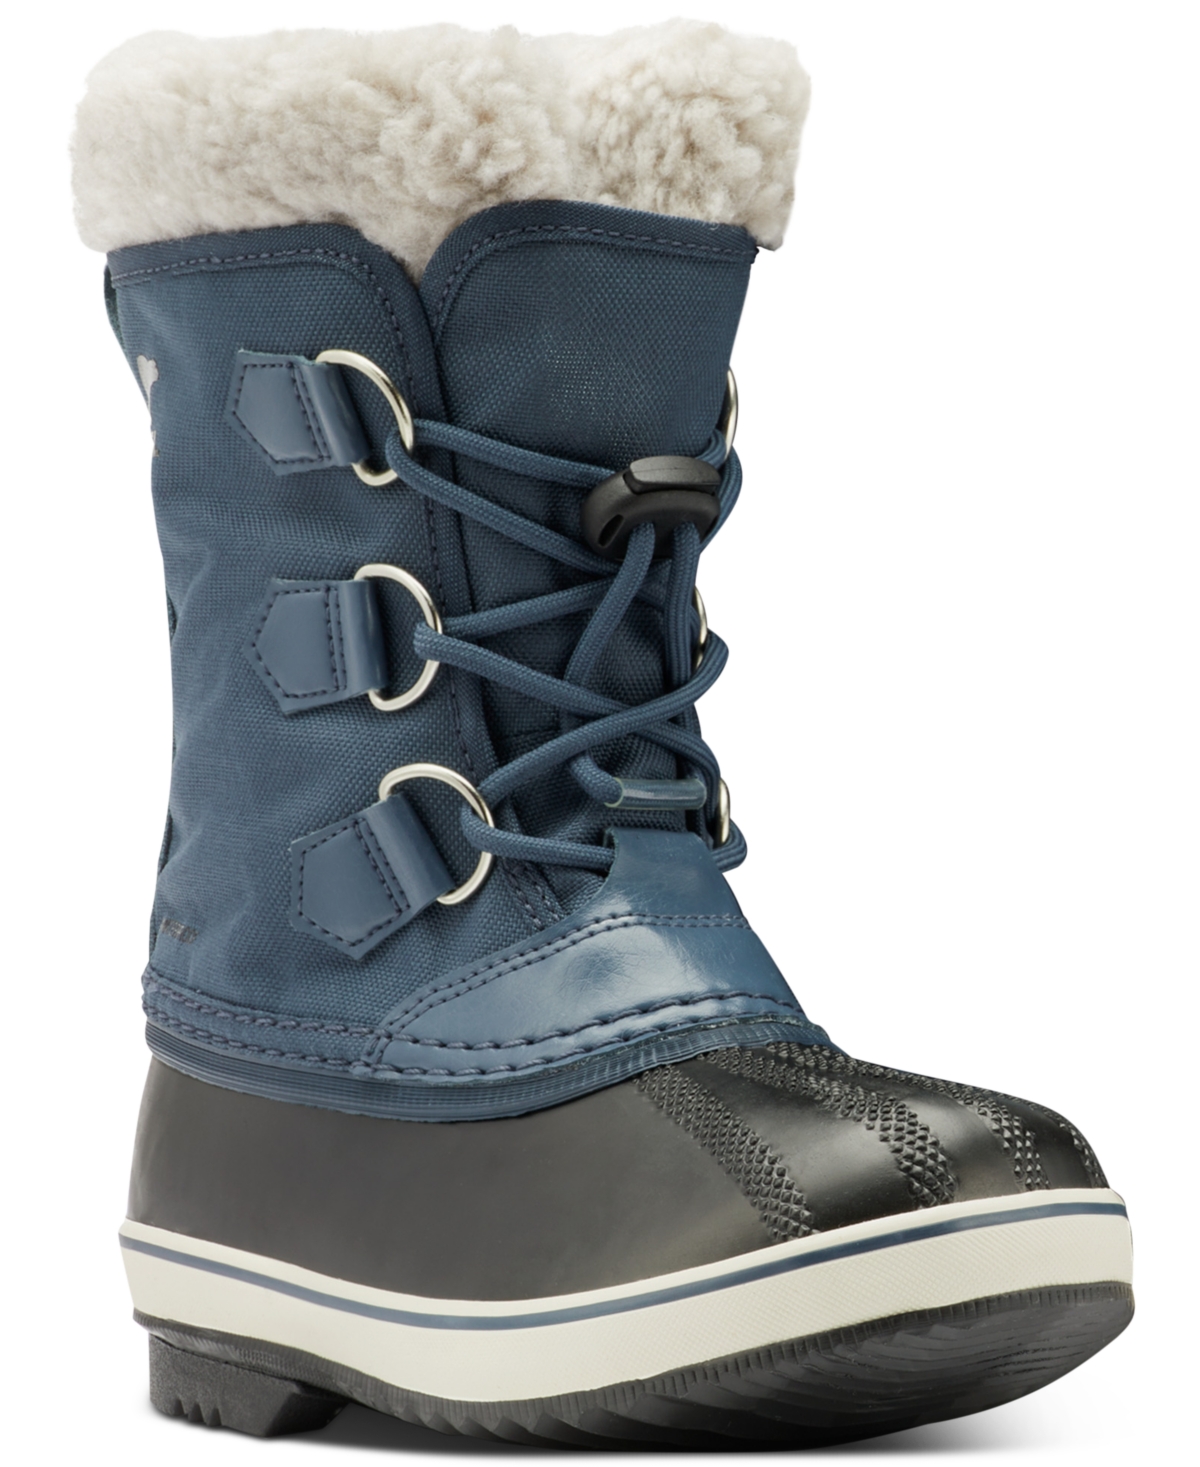 Size 10 SOREL Yoot Pac Waterproof Snow Boot in Uniform Blue at Nordstrom, 